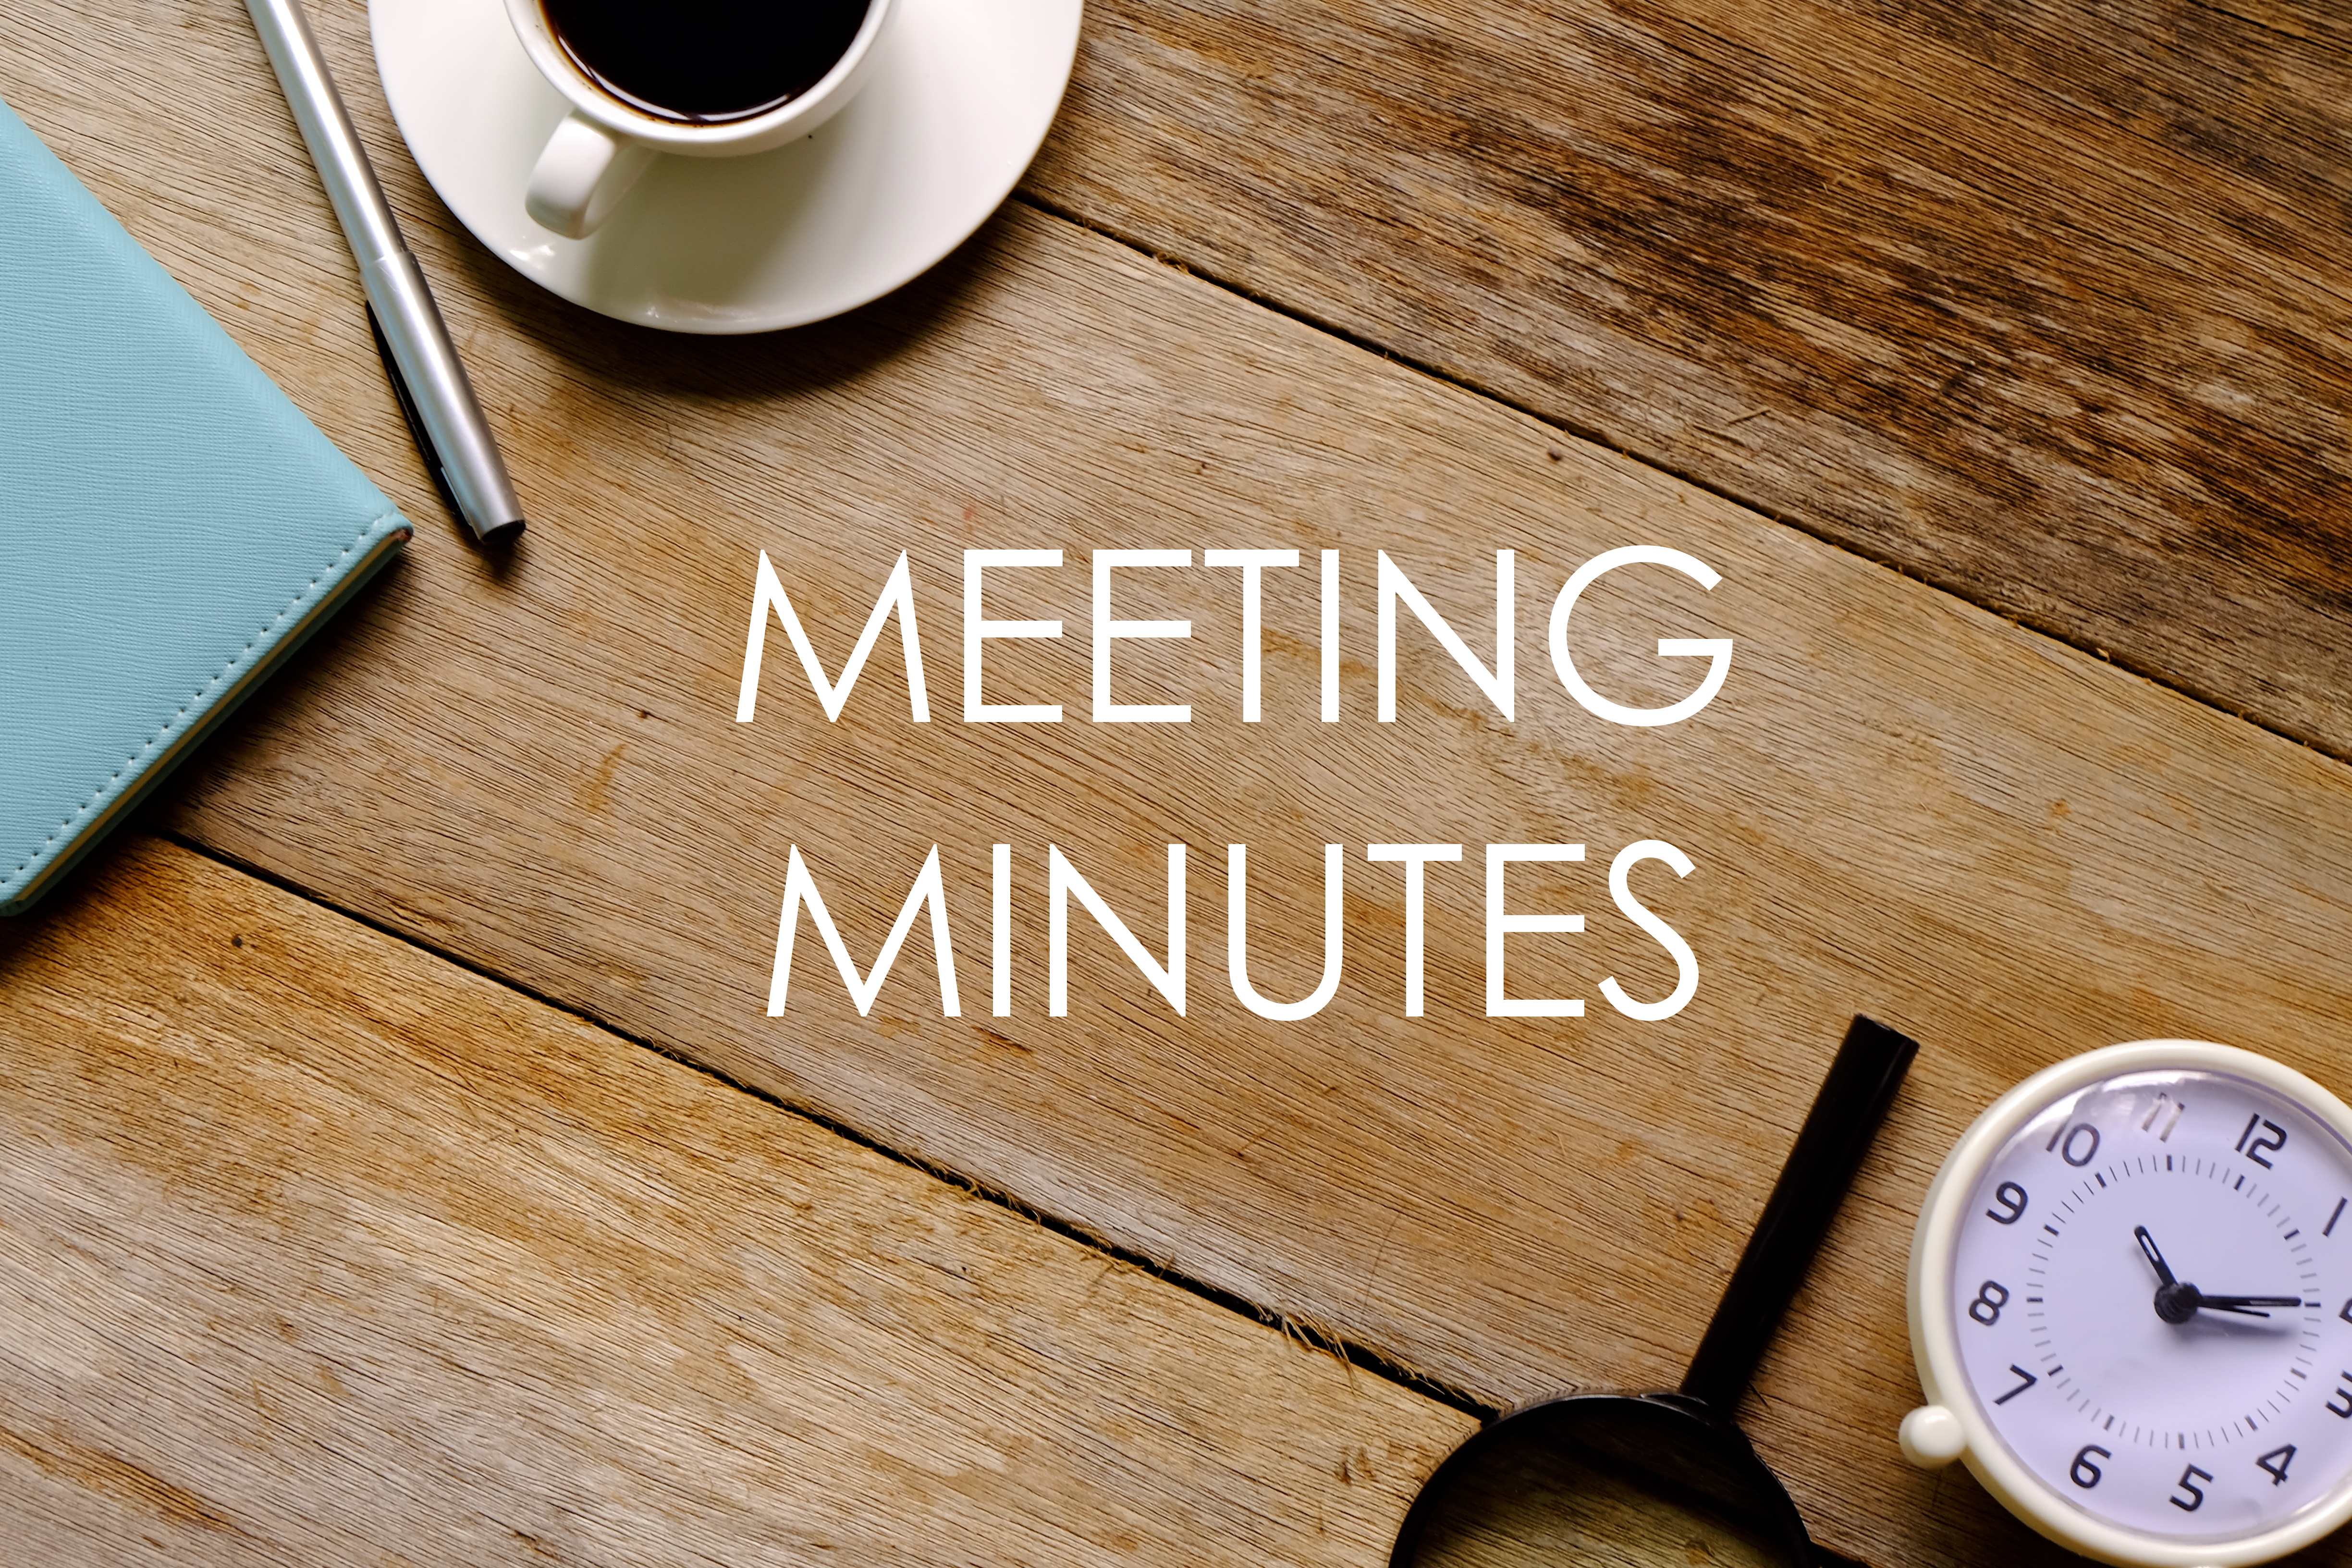 February's Board Meeting Minutes